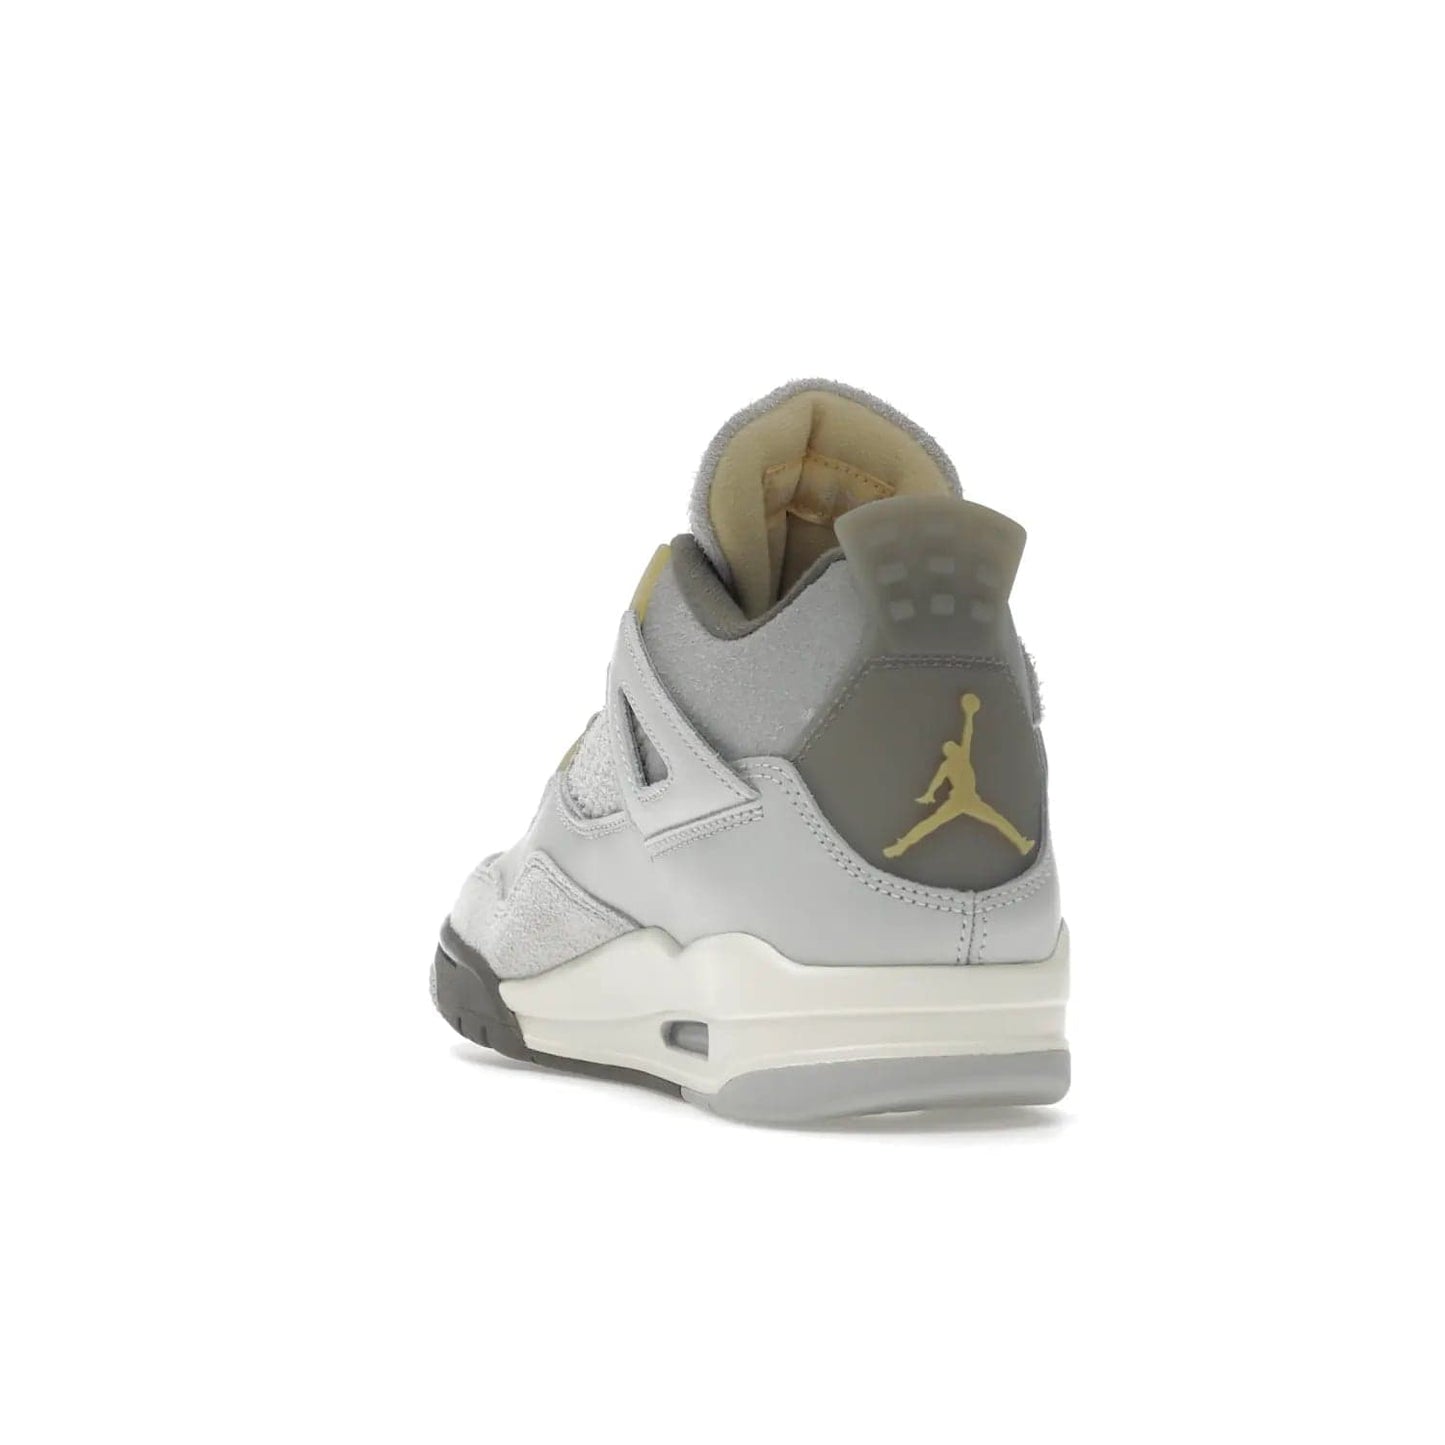 Jordan 4 Retro SE Craft Photon Dust - Image 26 - Only at www.BallersClubKickz.com - Upgrade your shoe collection with the Air Jordan 4 Retro SE Craft Photon Dust. This luxurious sneaker features a combination of suede and leather with unique grey tones like Photon Dust, Pale Vanilla, Off White, Grey Fog, Flat Pewter, and Sail. Available February 11, 2023.